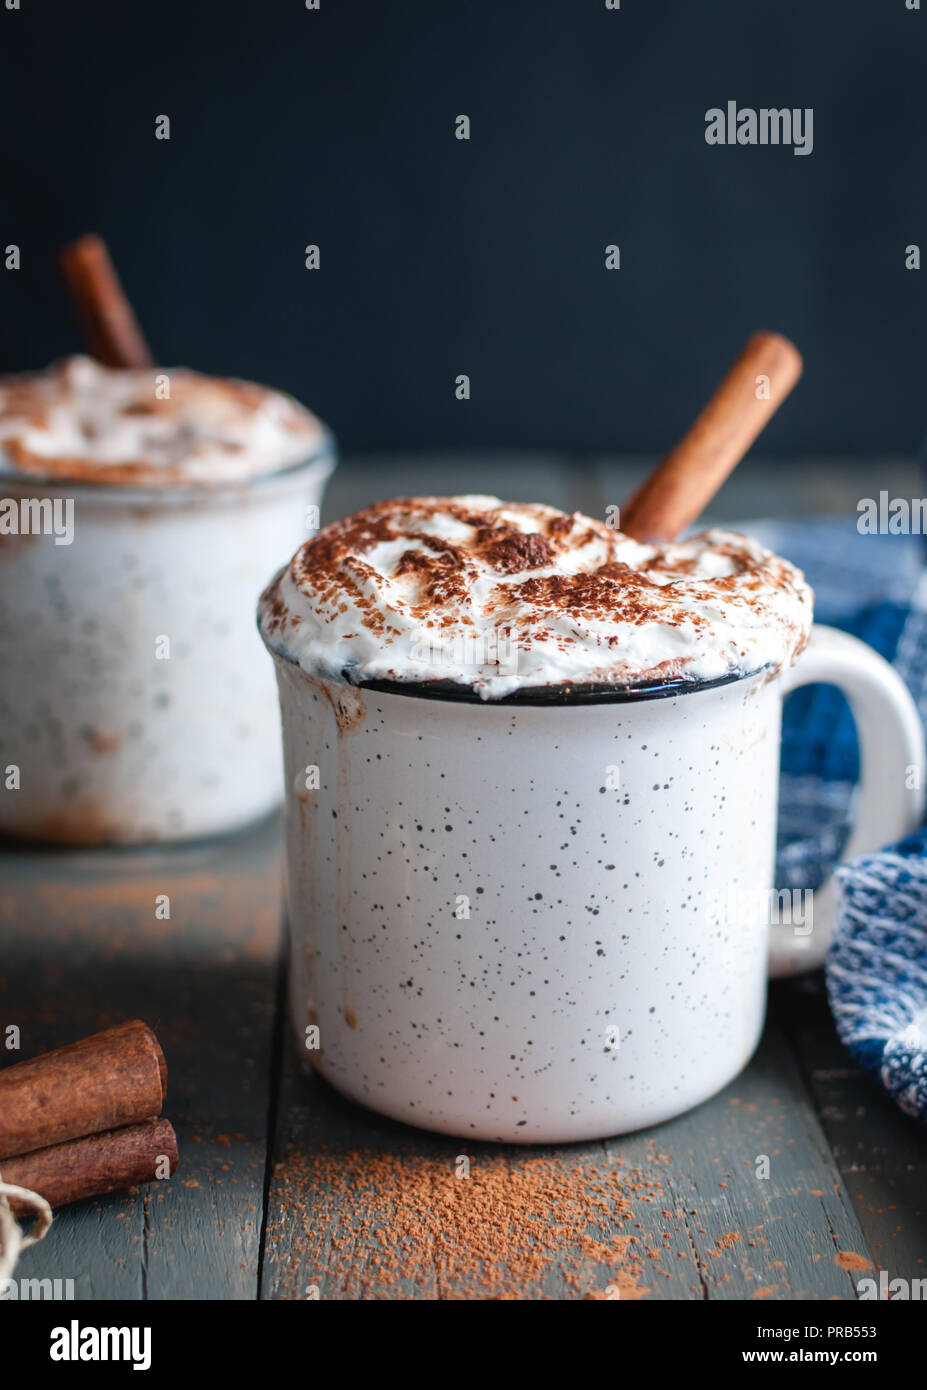 Close-up of hot cocoa with whipped cream and cinnamon stick on dark background Stock Photo